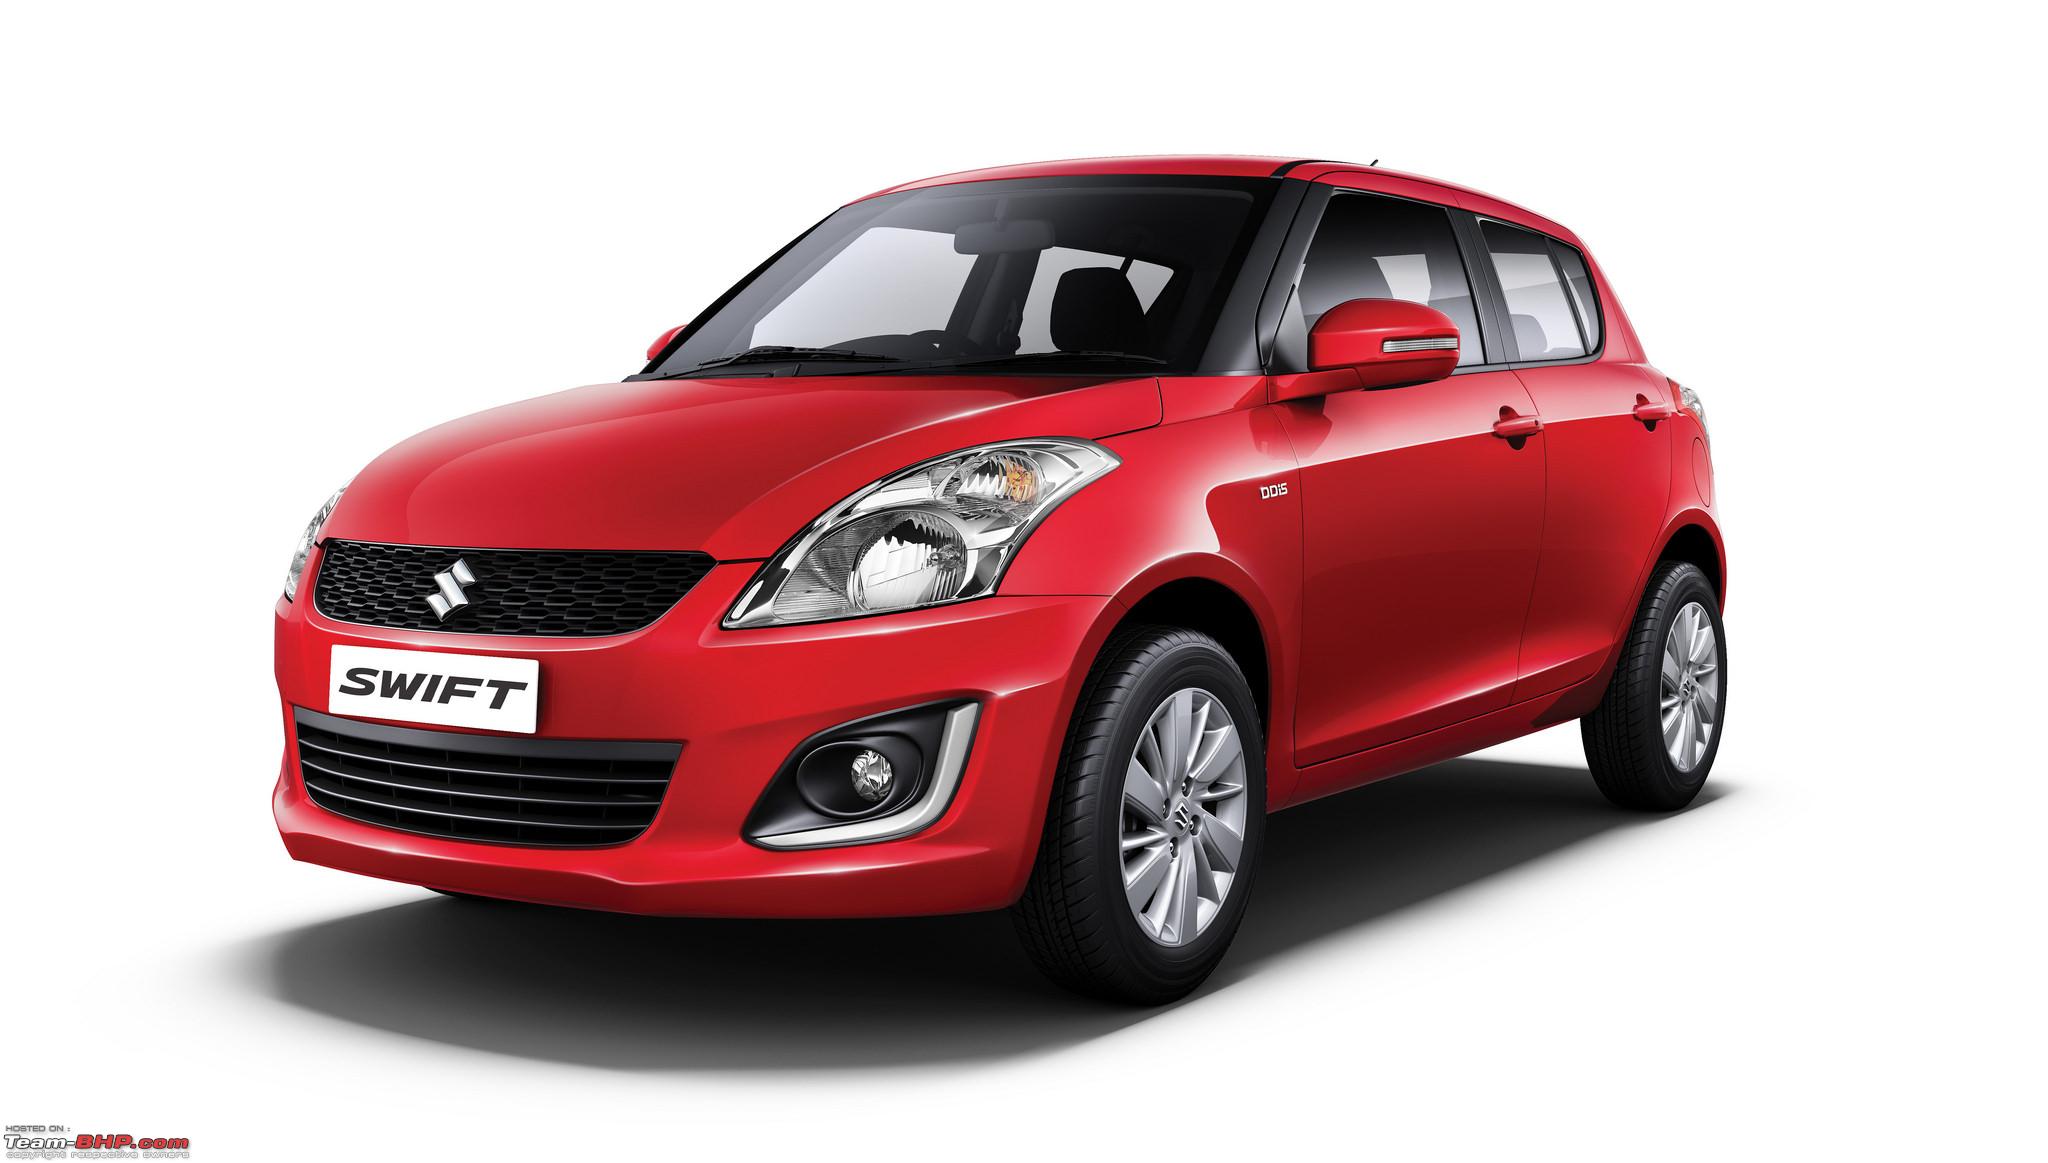 A decade with the Maruti Swift 13 lakh sales up! TeamBHP